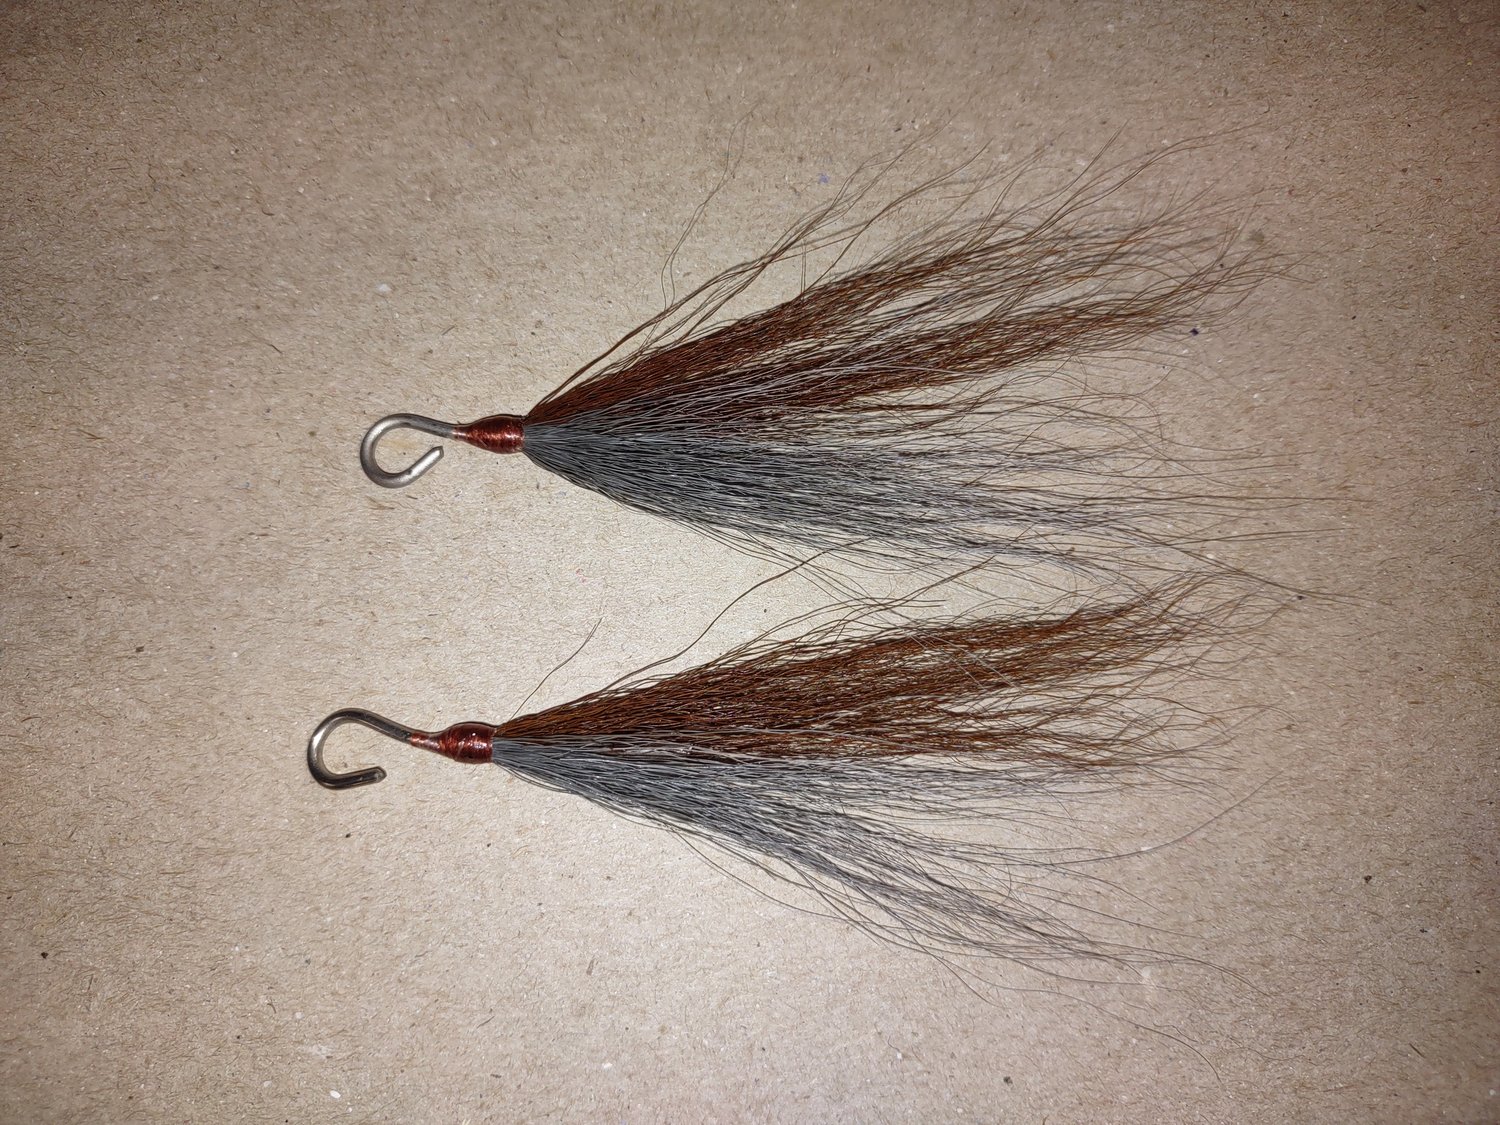 Bucktail Tail Flags (no hook, just wire tag) — 247 Lures - Handmade